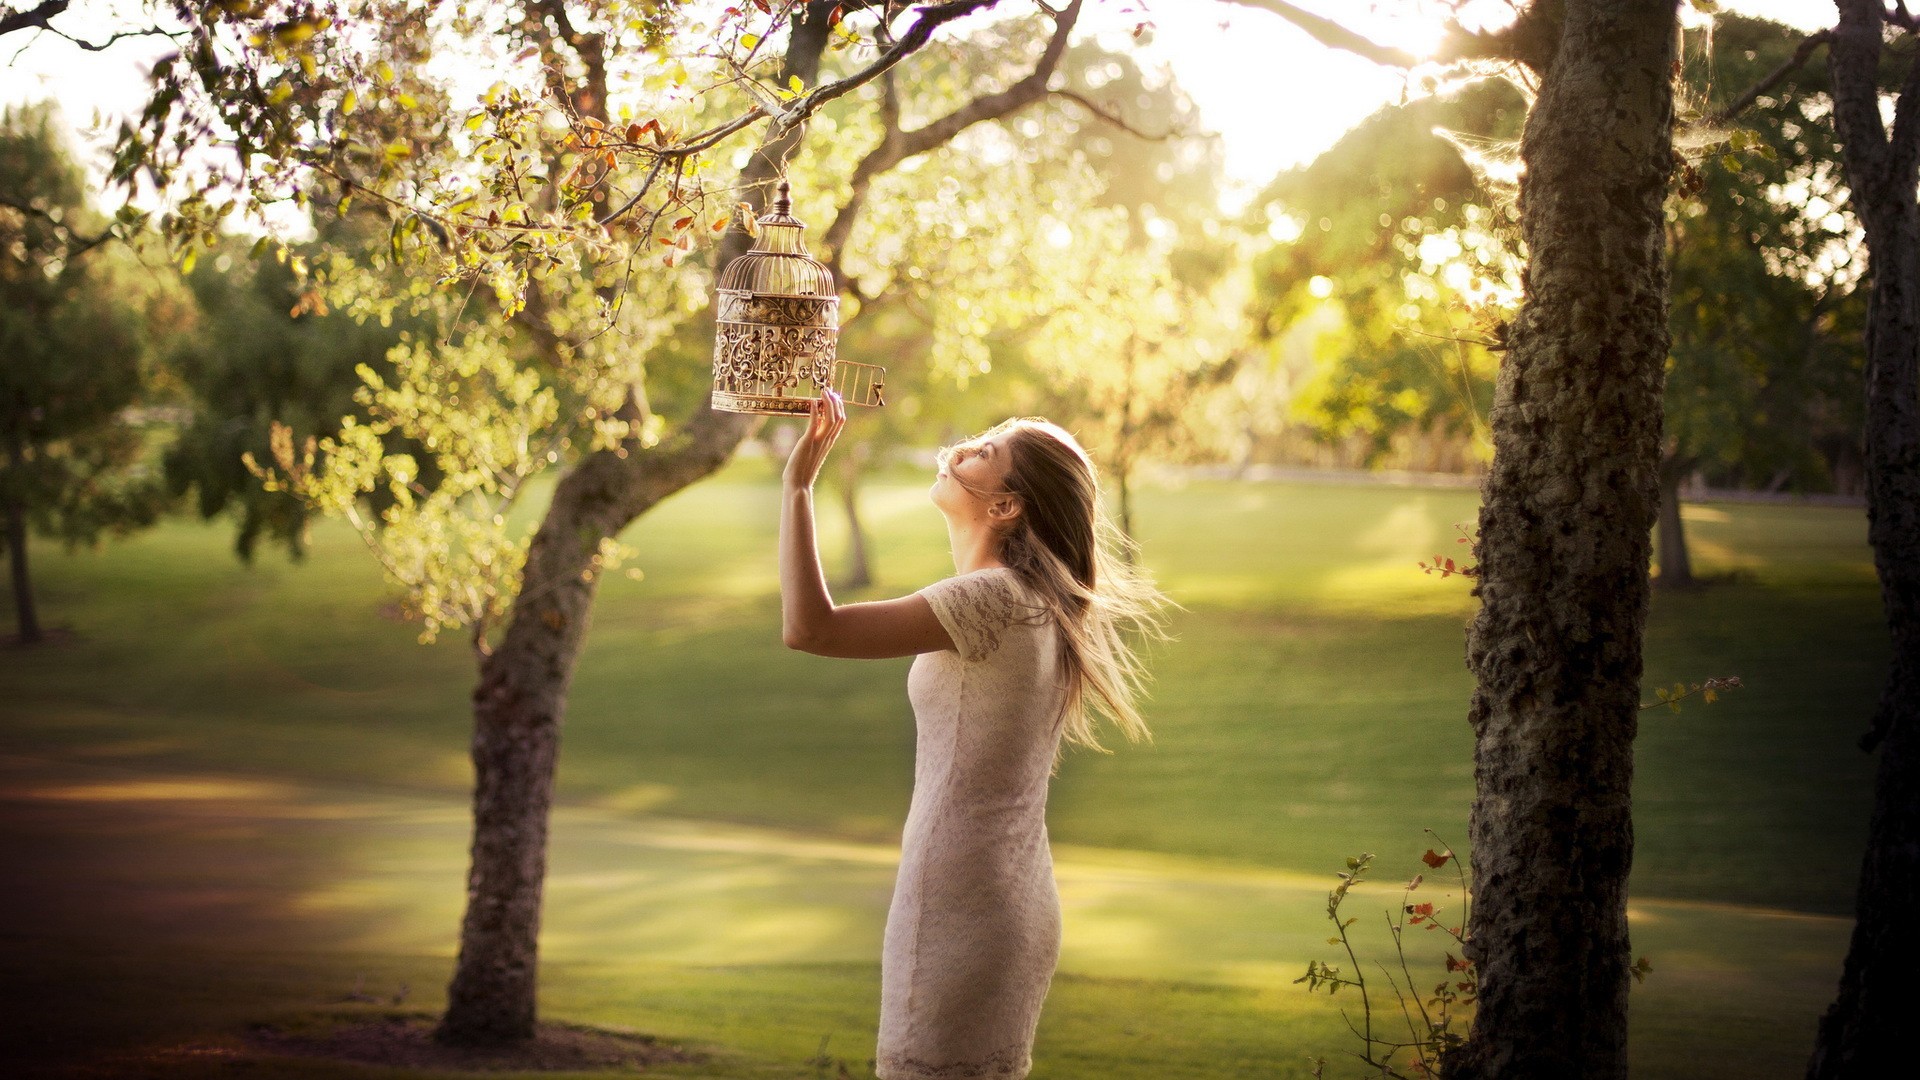 Nature White Dress White Clothing Dress Blonde Women Outdoors Trees Birdcage Depth Of Field 1920x1080